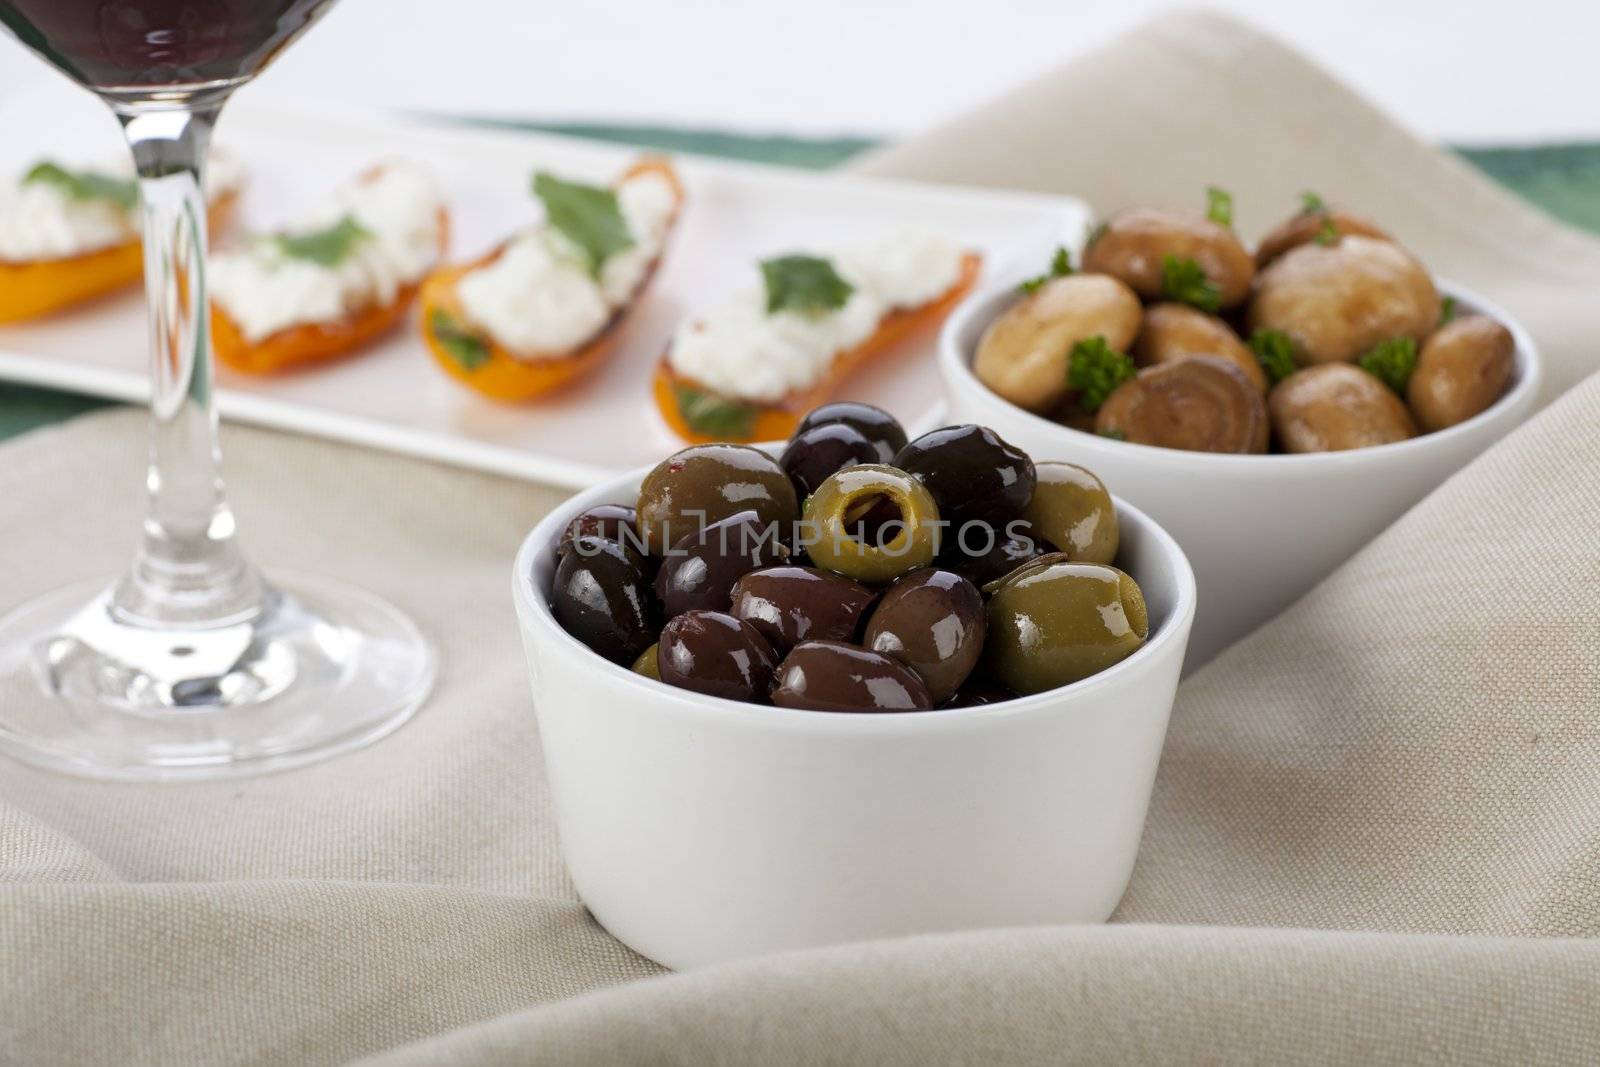 Tapas spread with olives, marinated mushrooms and cheese filled peppers.